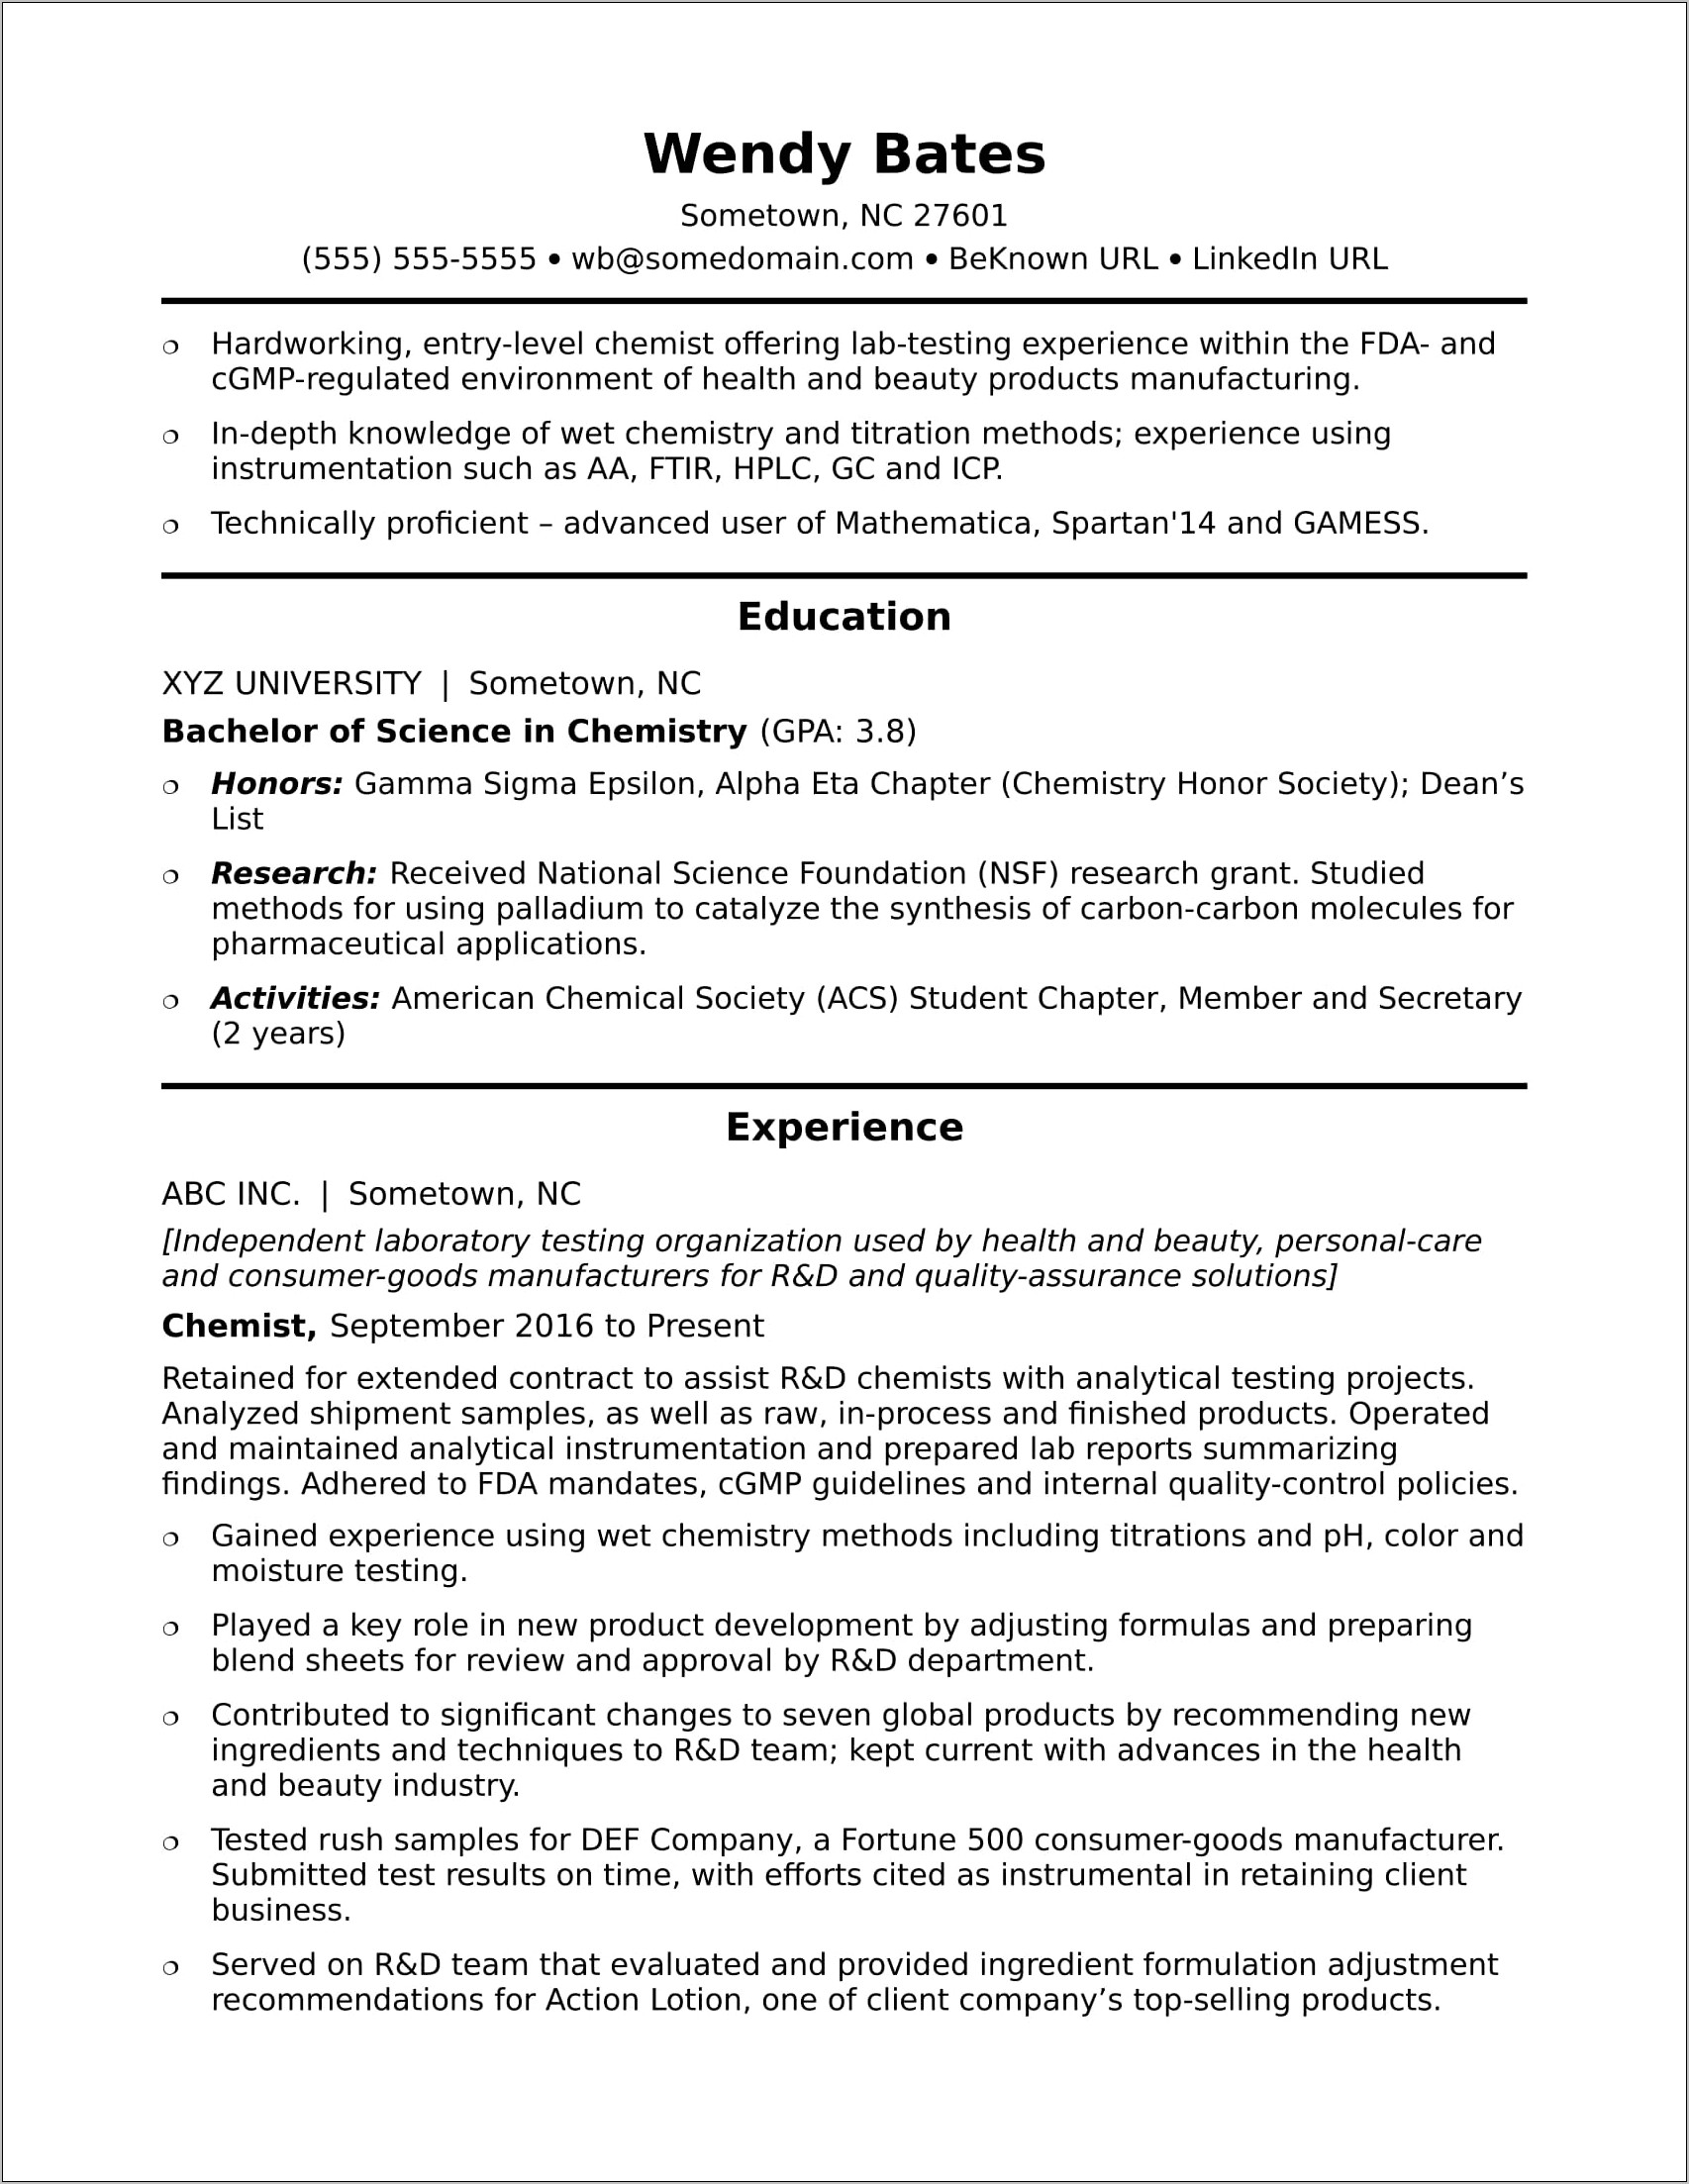 Sample Resume For Experienced Tester Pdf